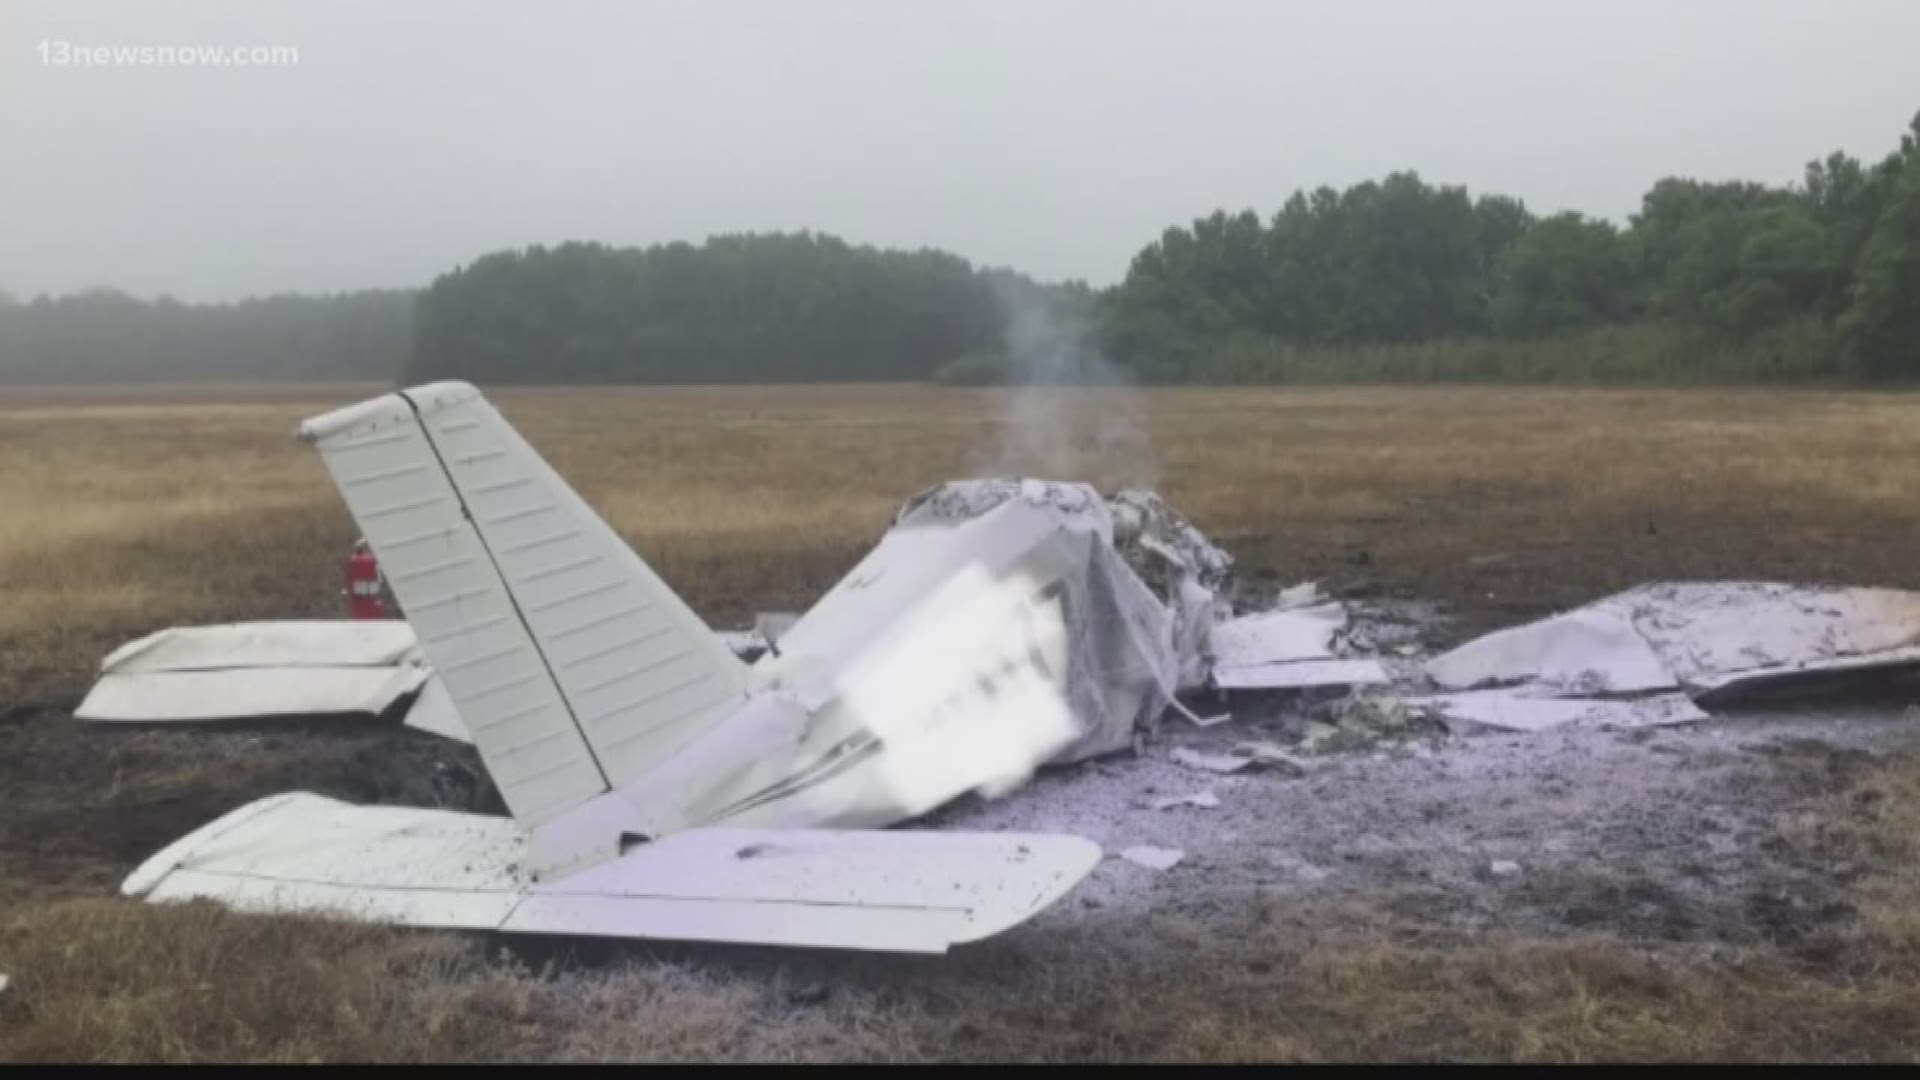 A single-engine plane went down in a field shortly after taking off from Chesapeake Regional Airport